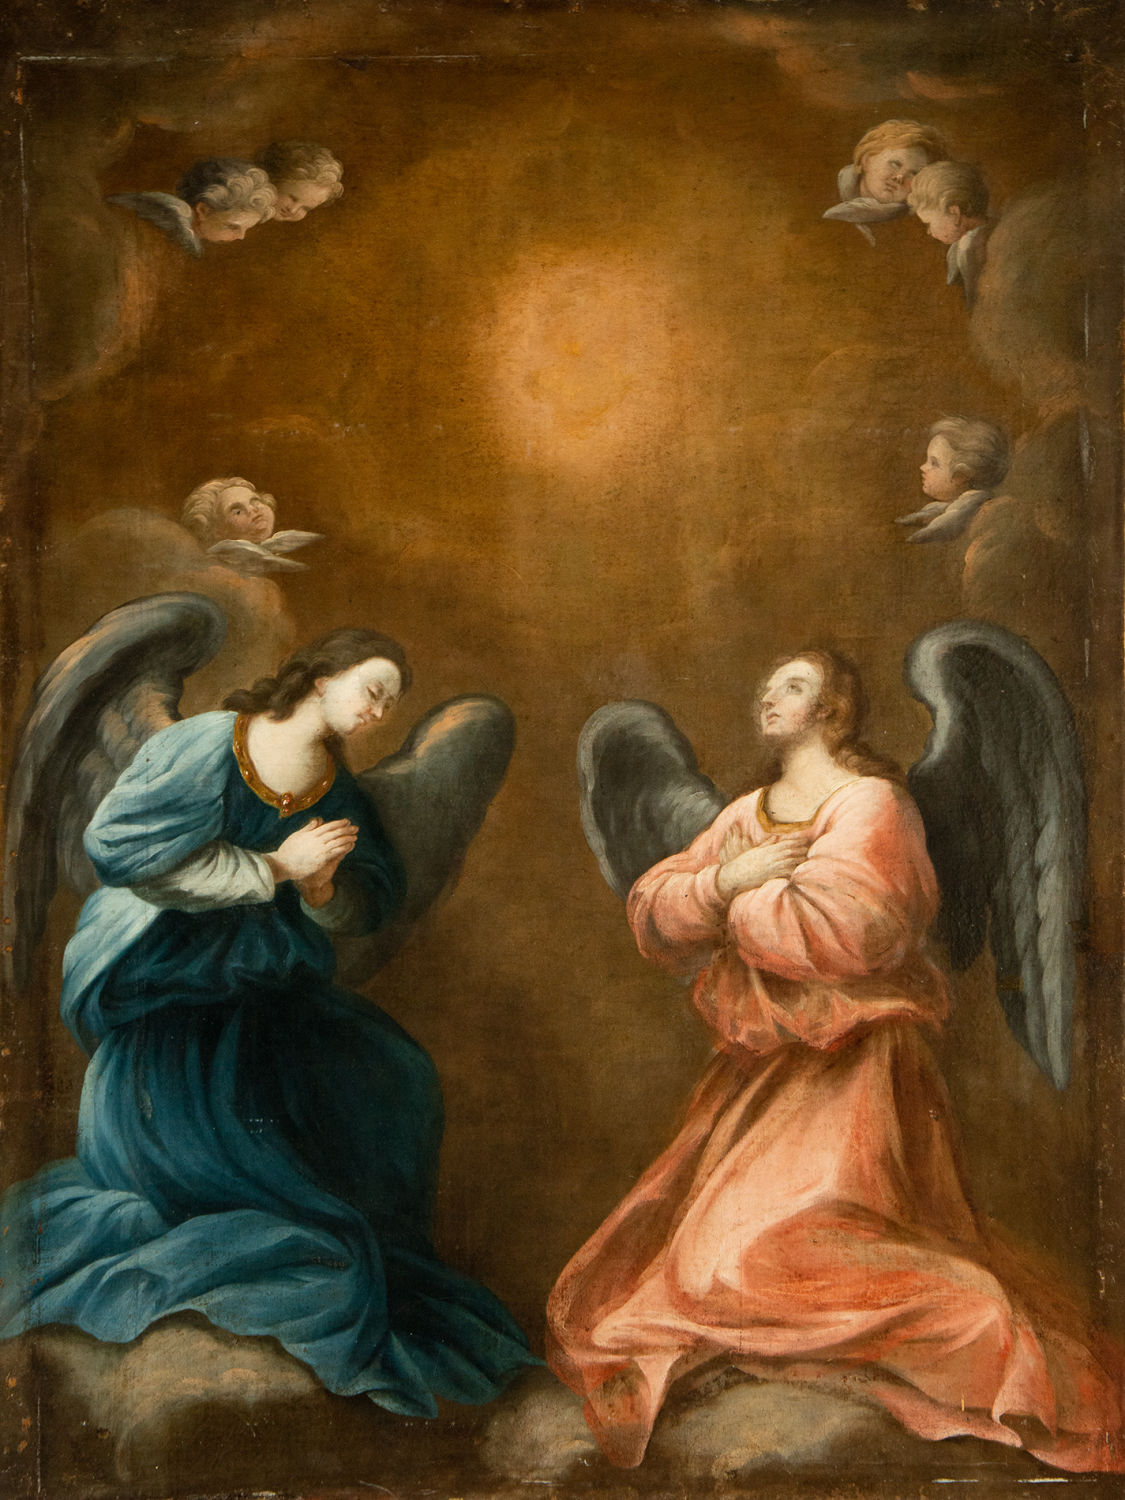 The Annunciation, Cuzco school from the 18th century